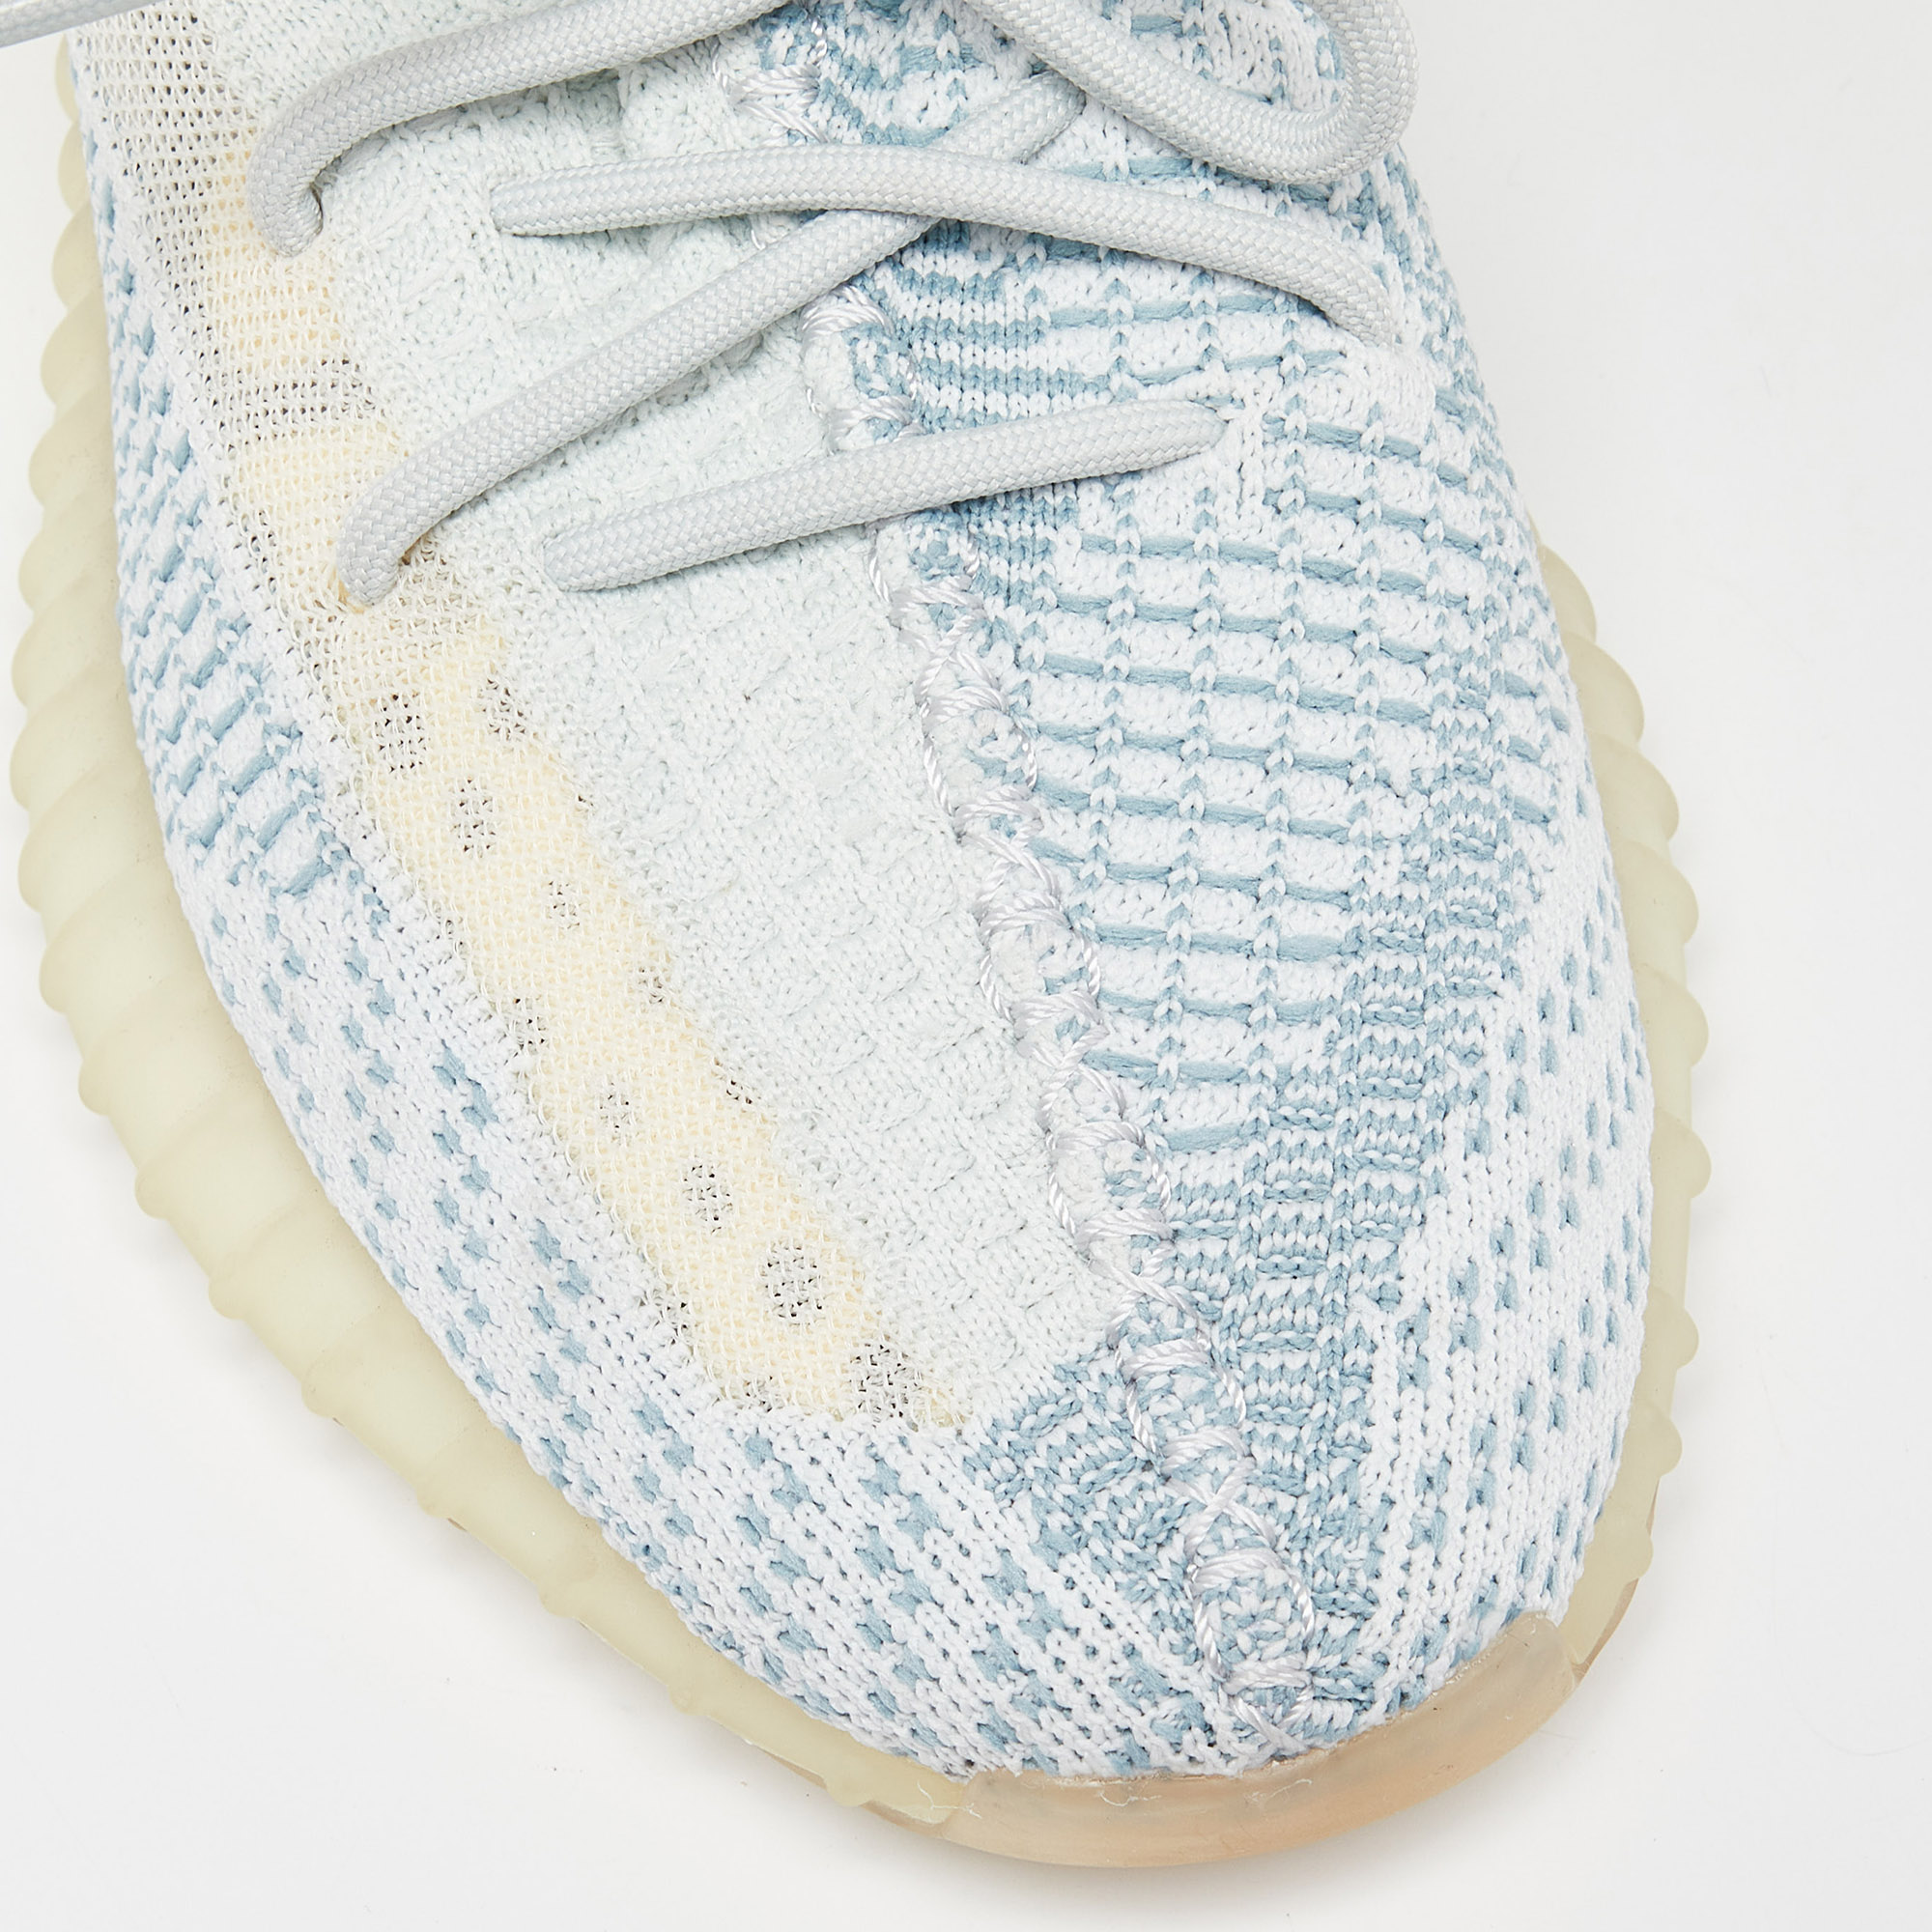 Yeezy X Adidas Pale Green Knit Fabric Boost 350 V2 Cloud White Non Reflective Sneakers Size 42 2/3